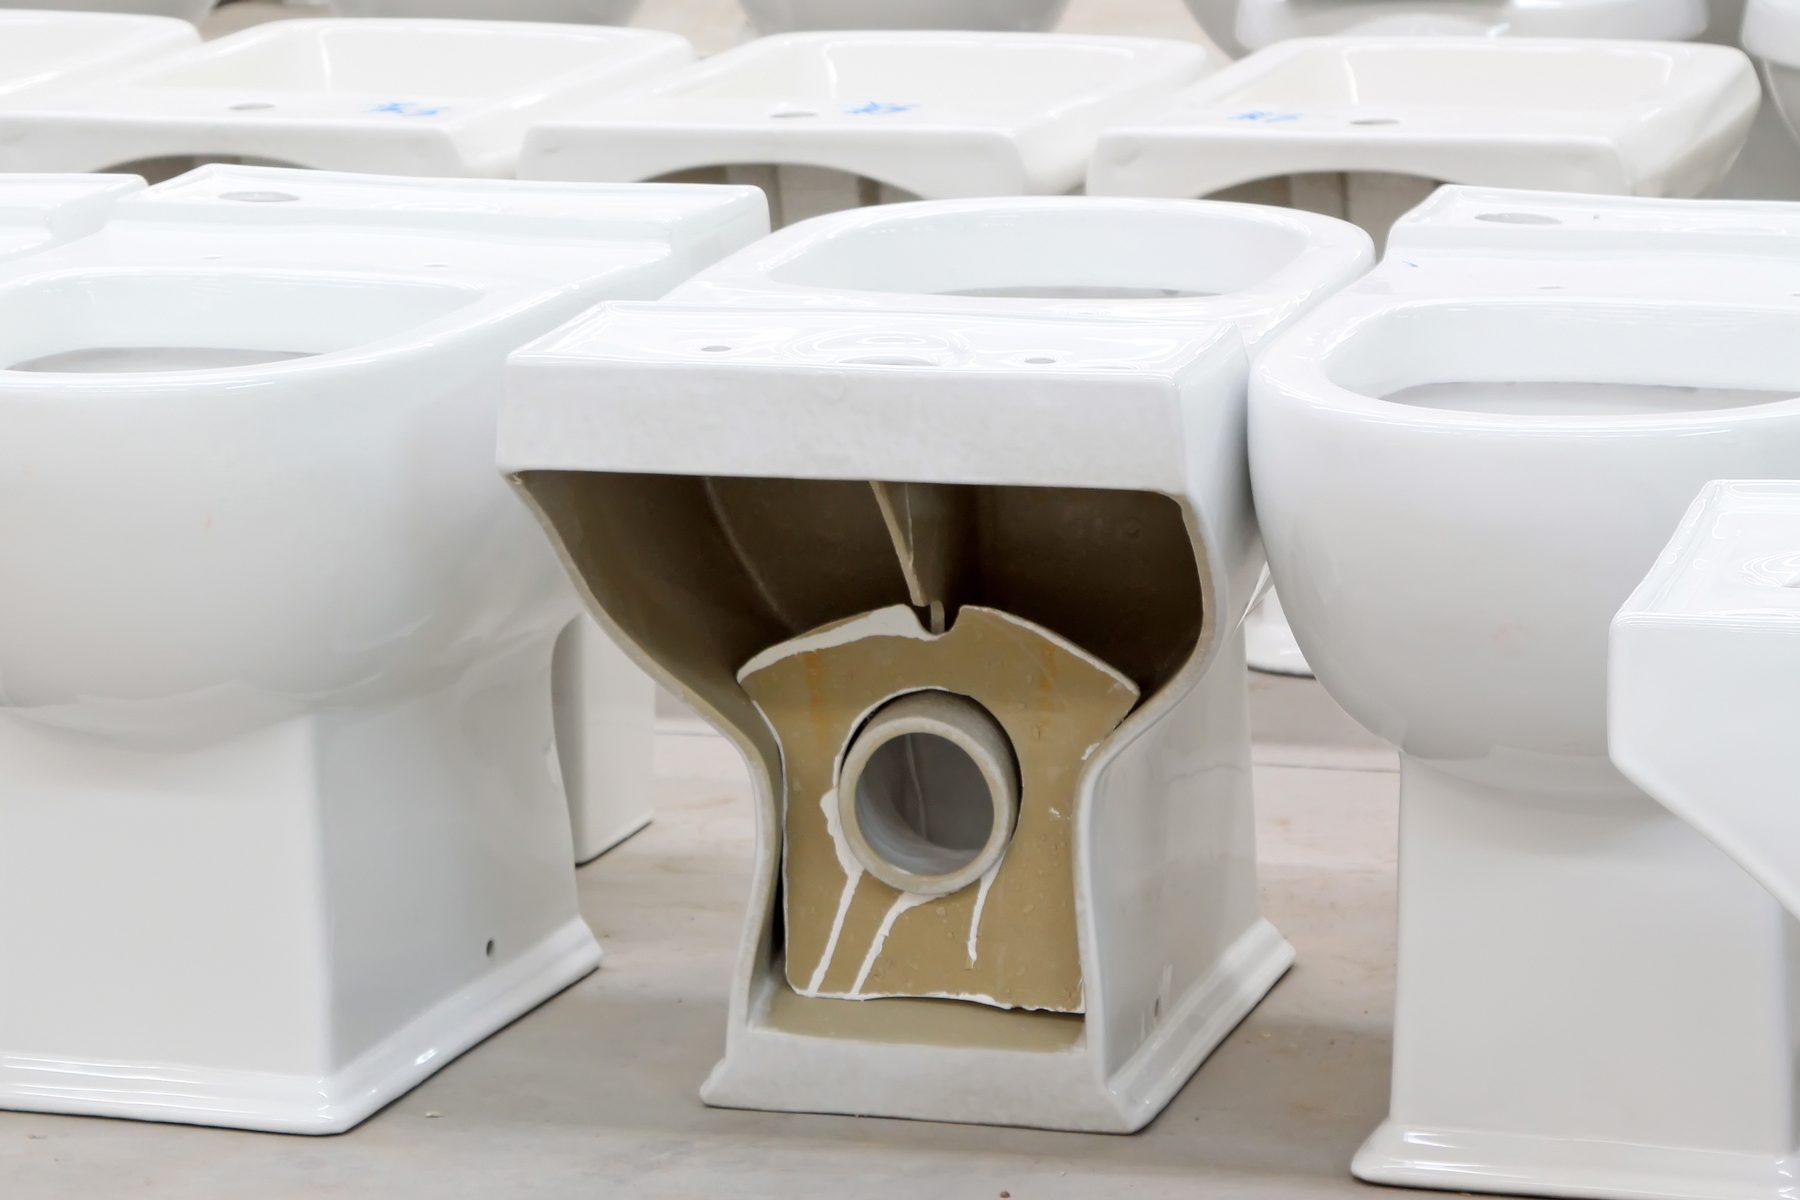 Ceramic toilet semi finished products